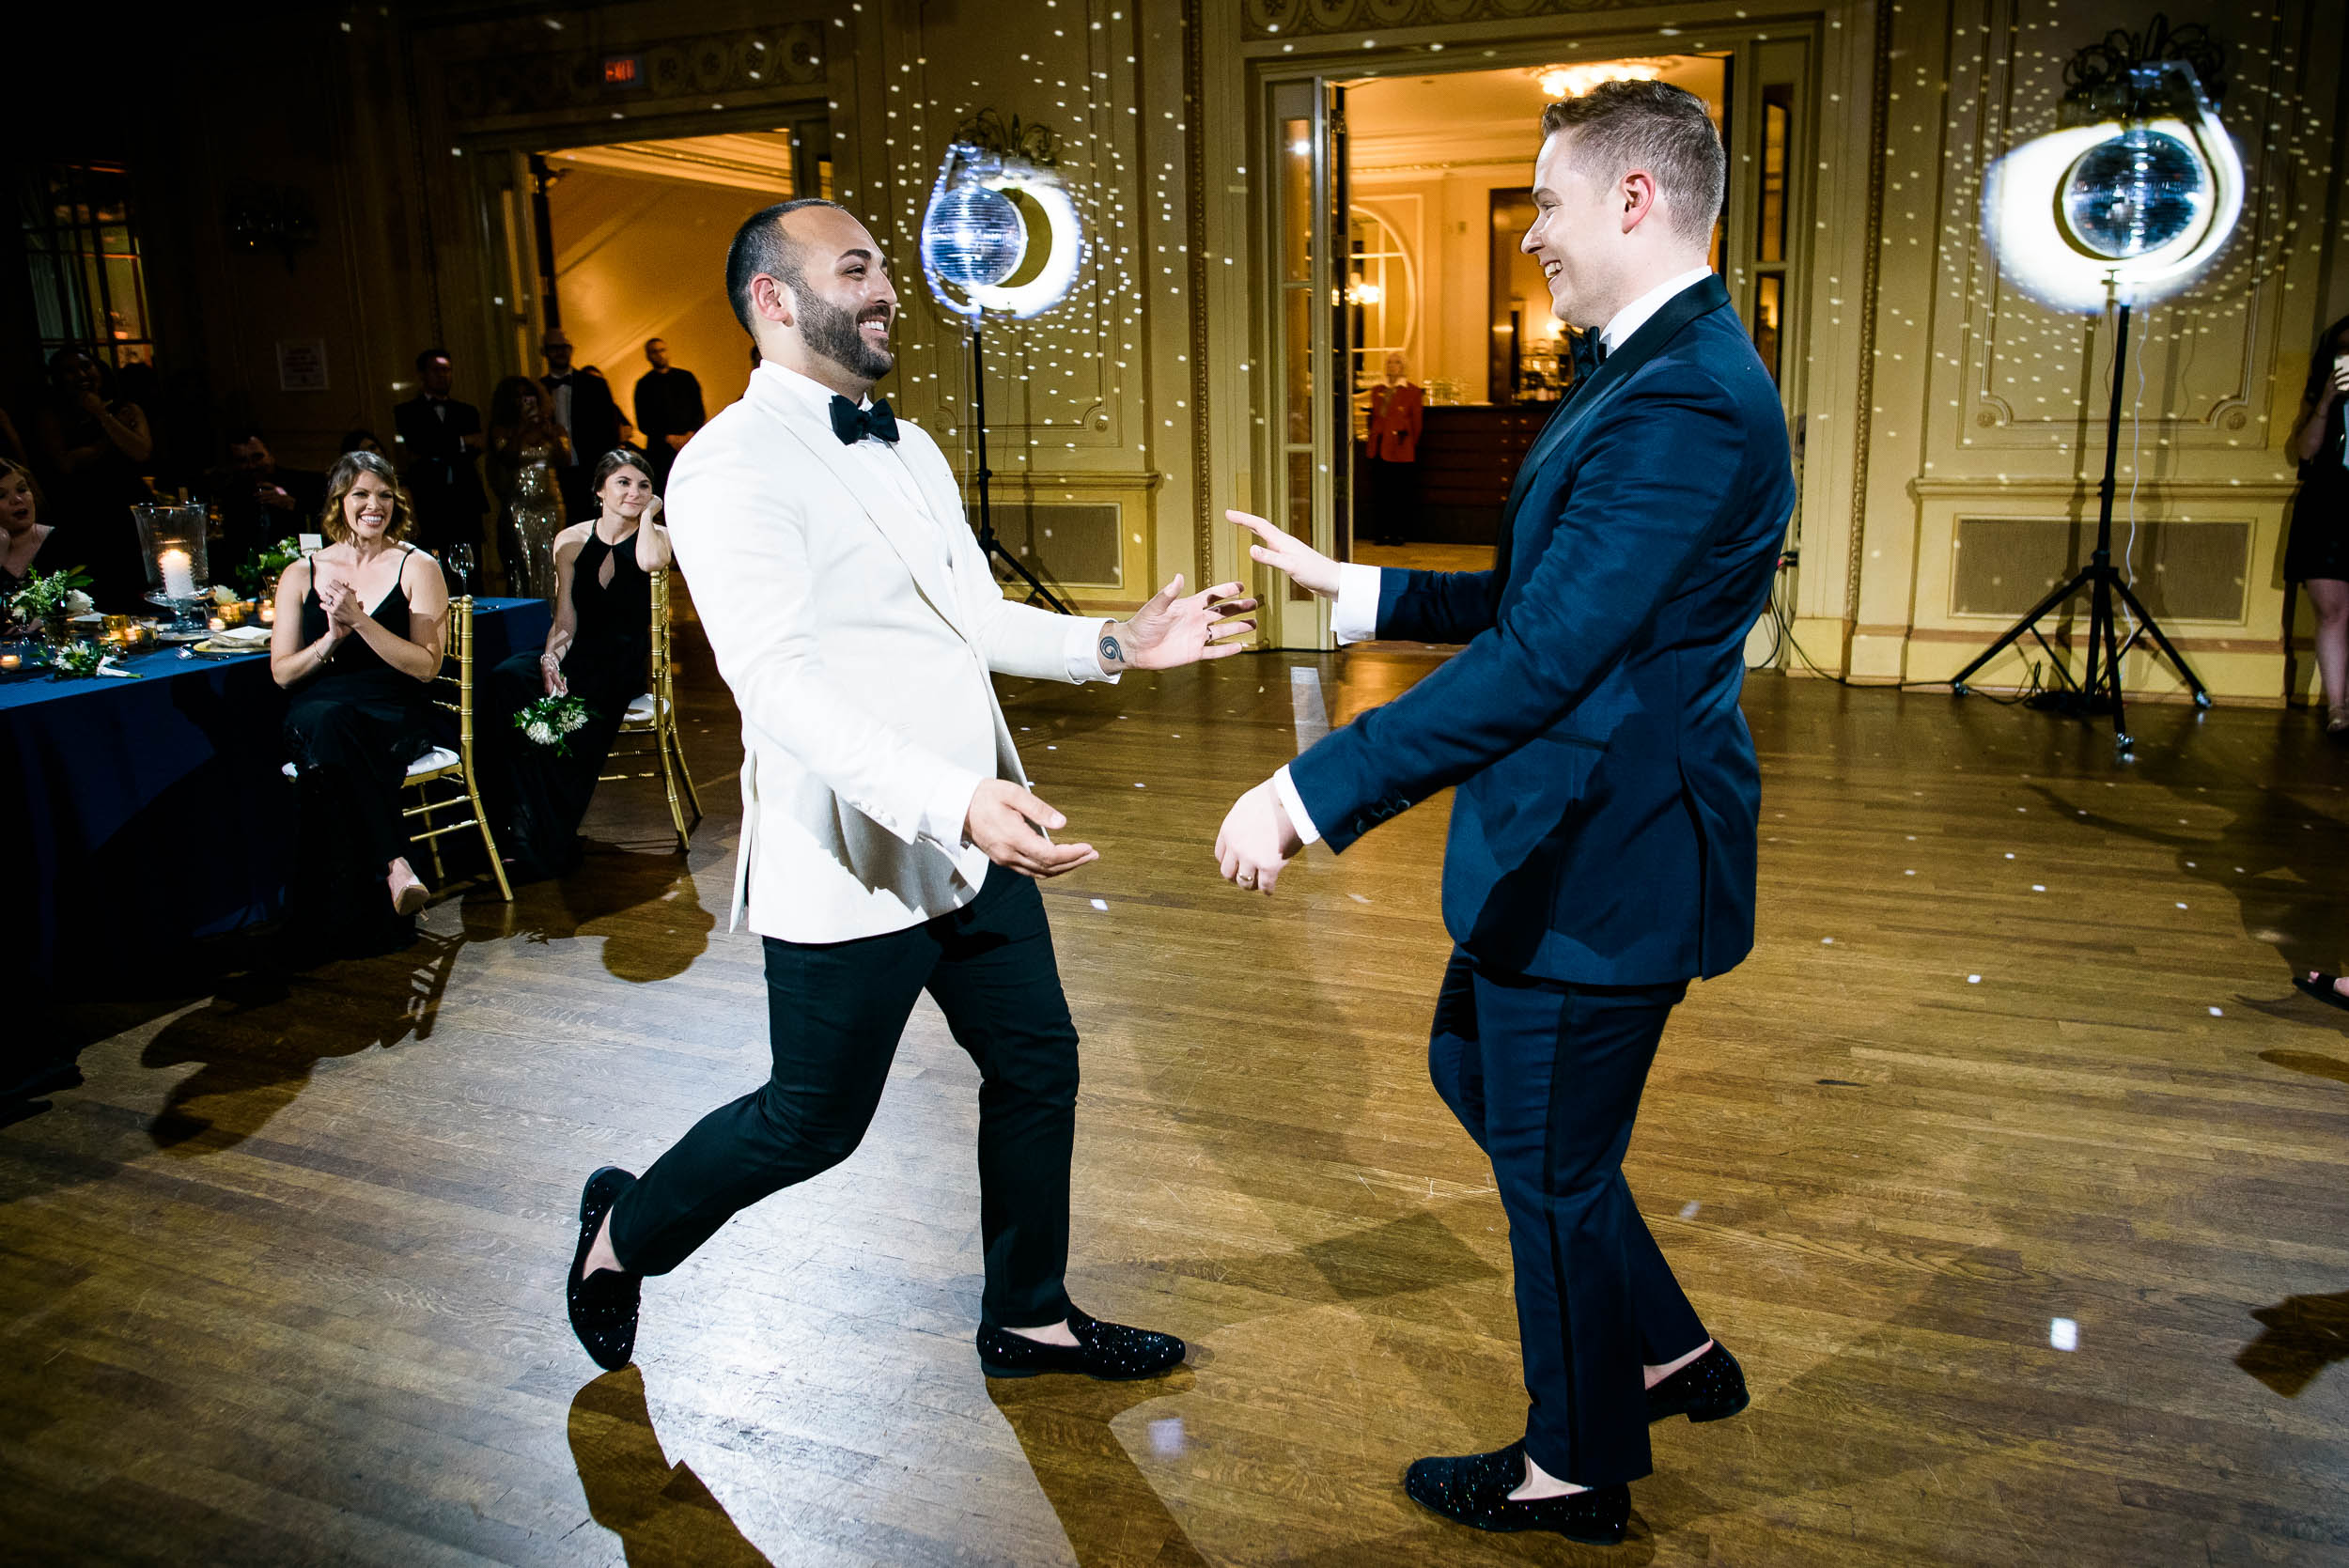 Grooms dancing at wedding reception for luxurious fall wedding at the Chicago Symphony Center captured by J. Brown Photography. See more wedding ideas at jbrownphotography.com!